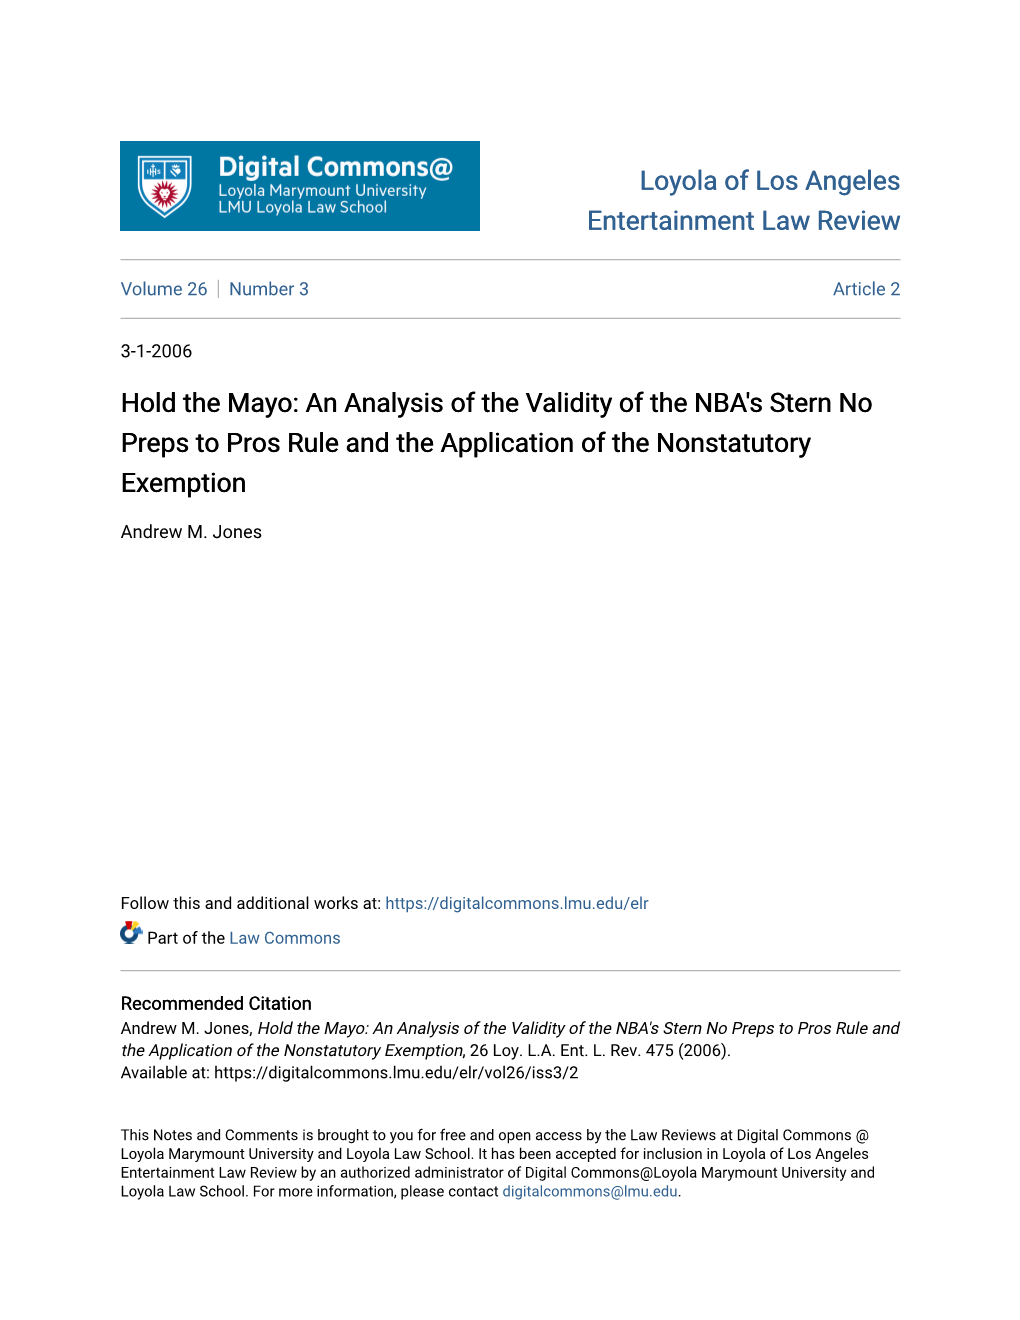 An Analysis of the Validity of the NBA's Stern No Preps to Pros Rule and the Application of the Nonstatutory Exemption